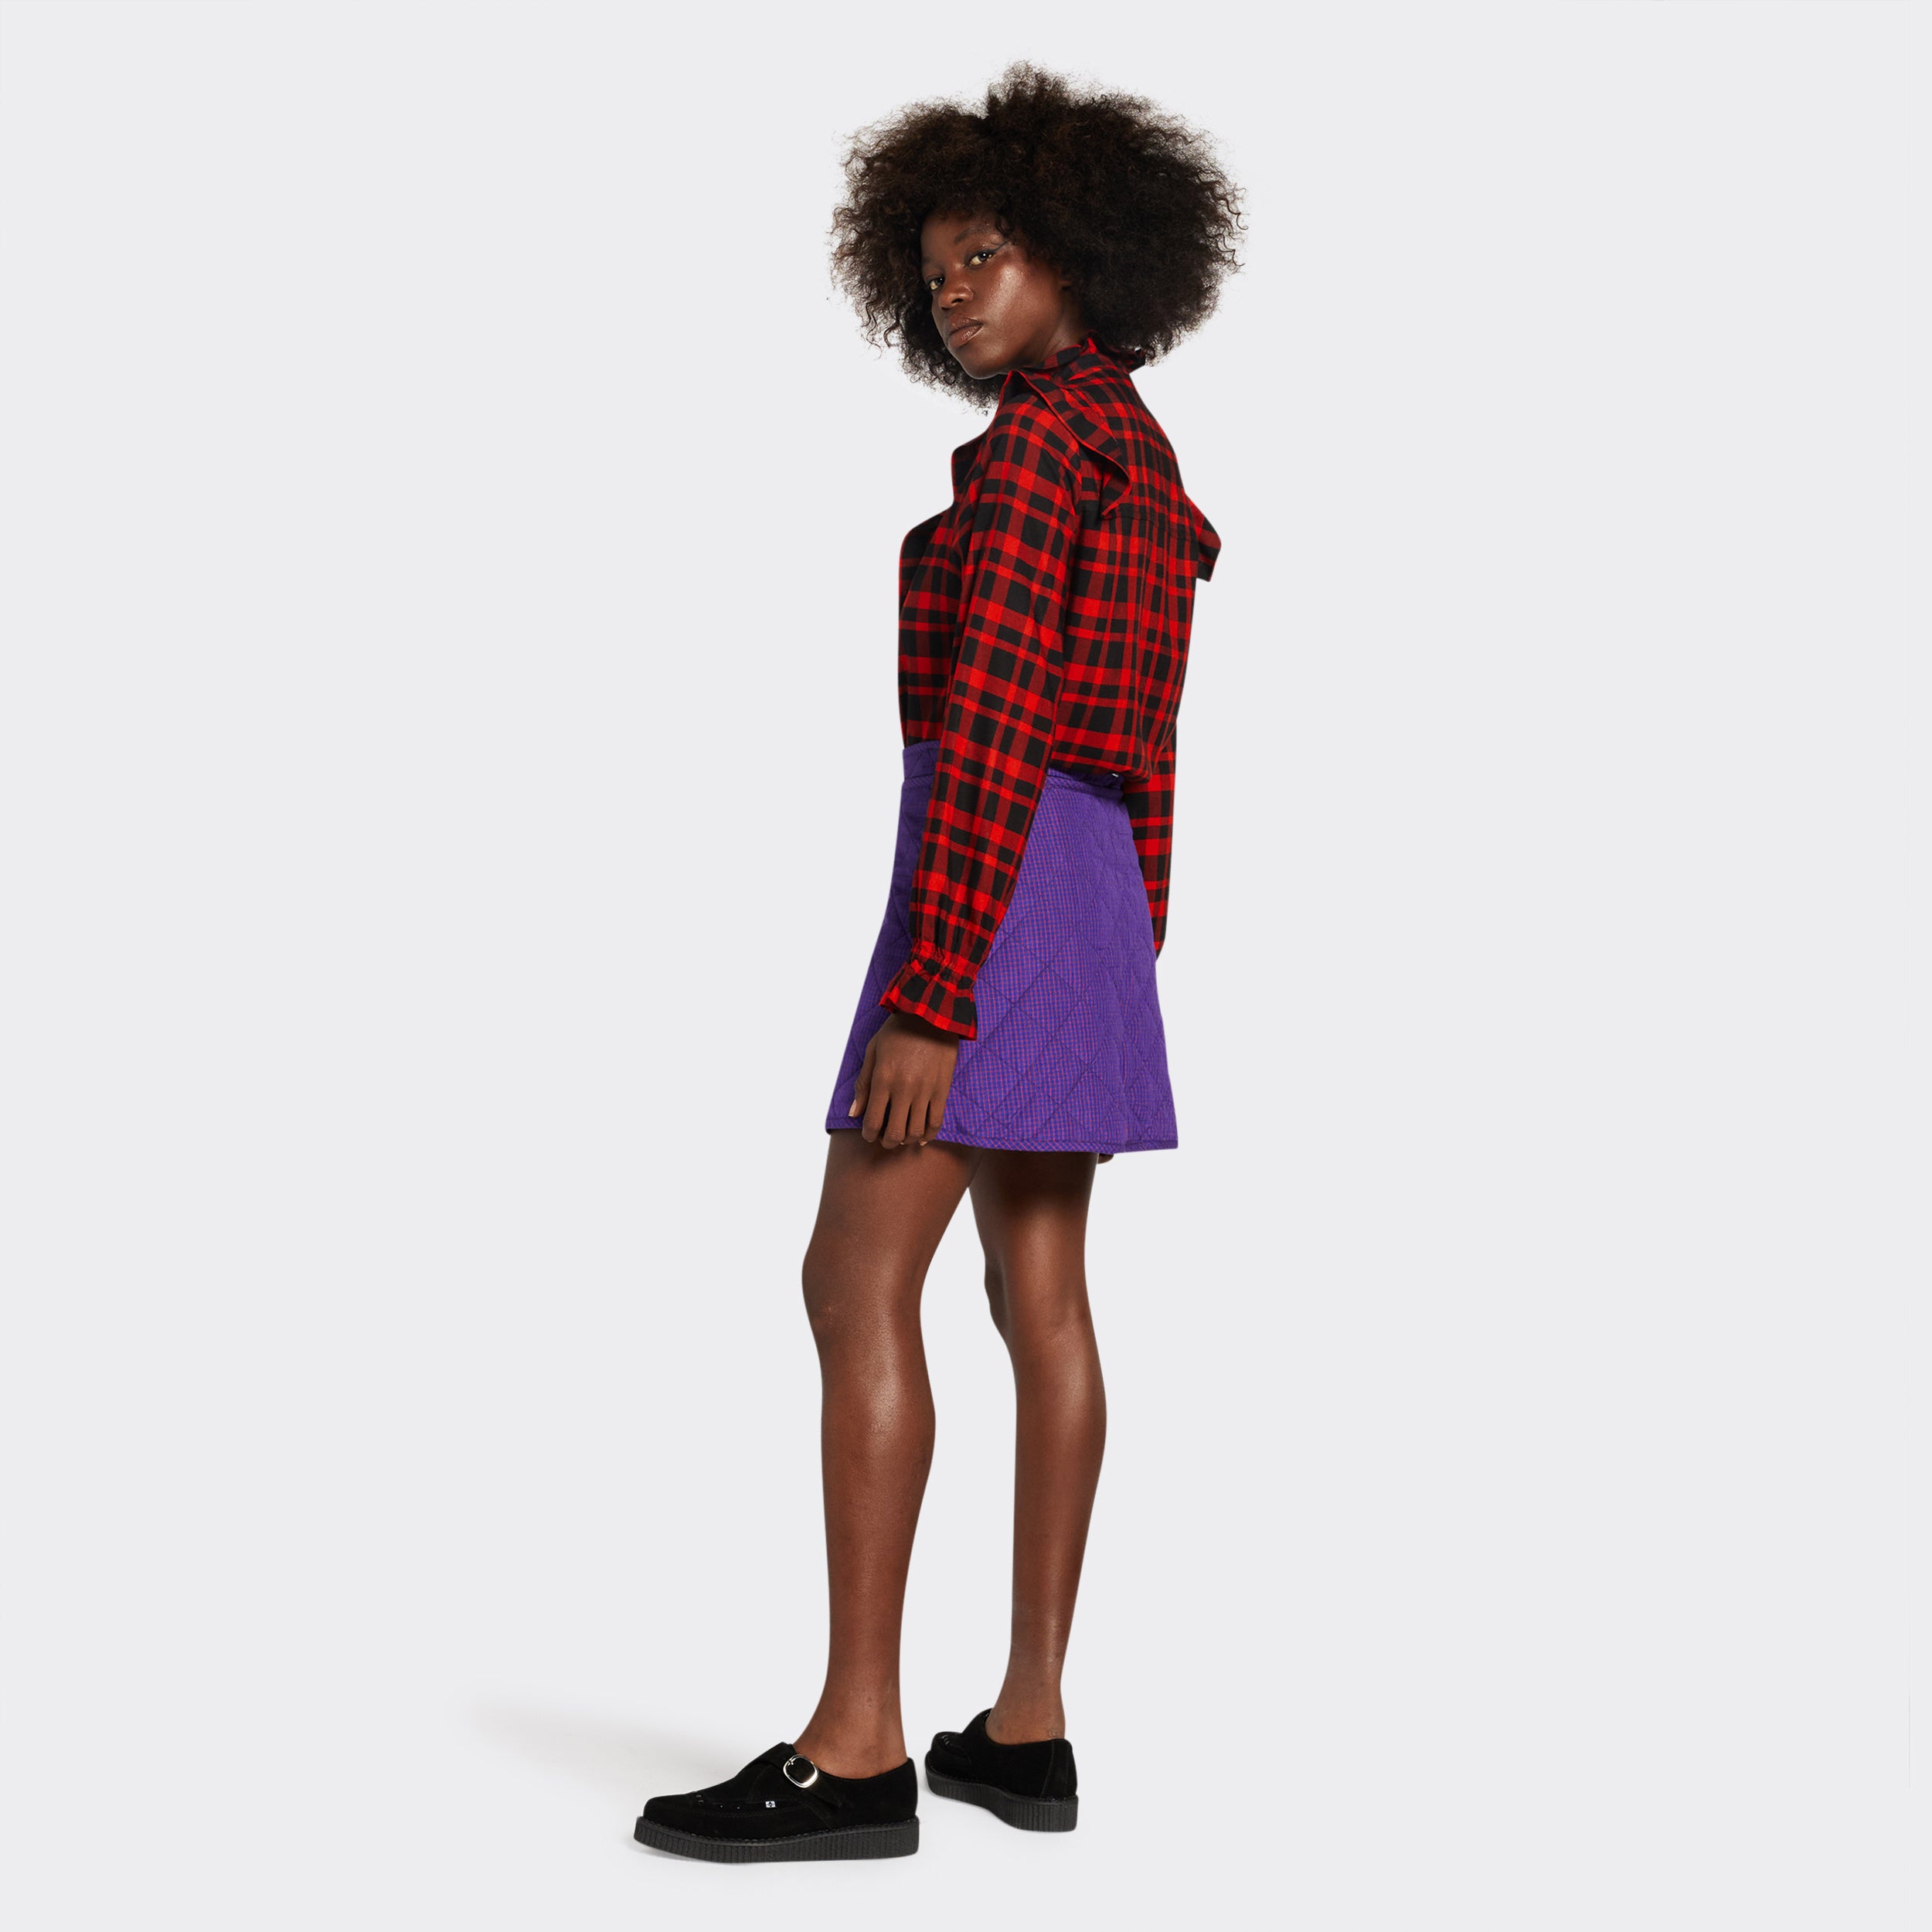 reversible padded miniskirt in maasai fabric worn on the purple side with micro checks